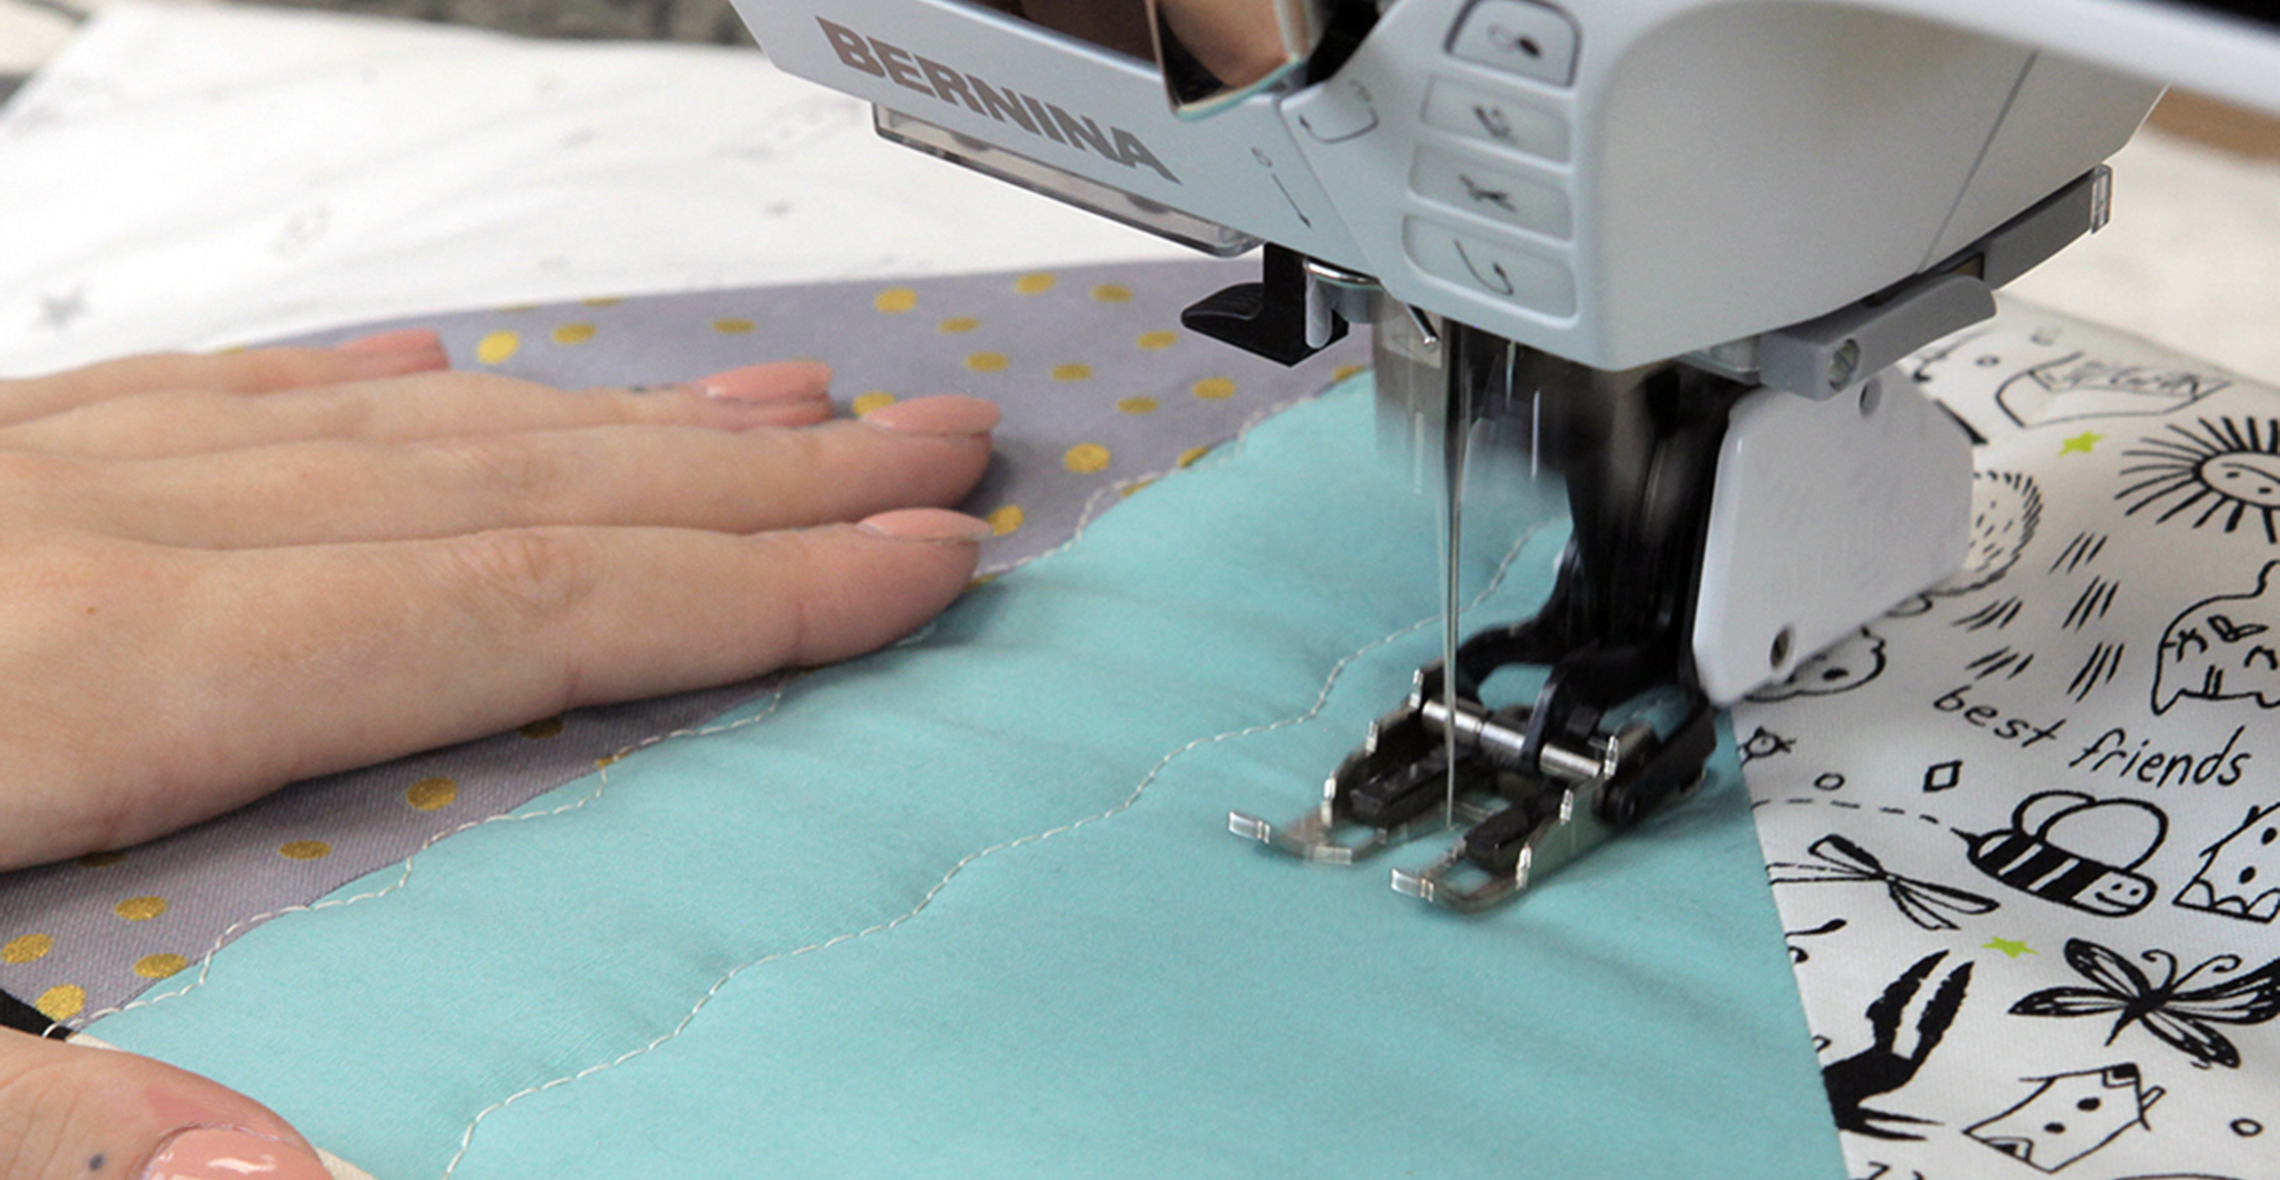 Quilting with the BERNINA Walking foot tutorial